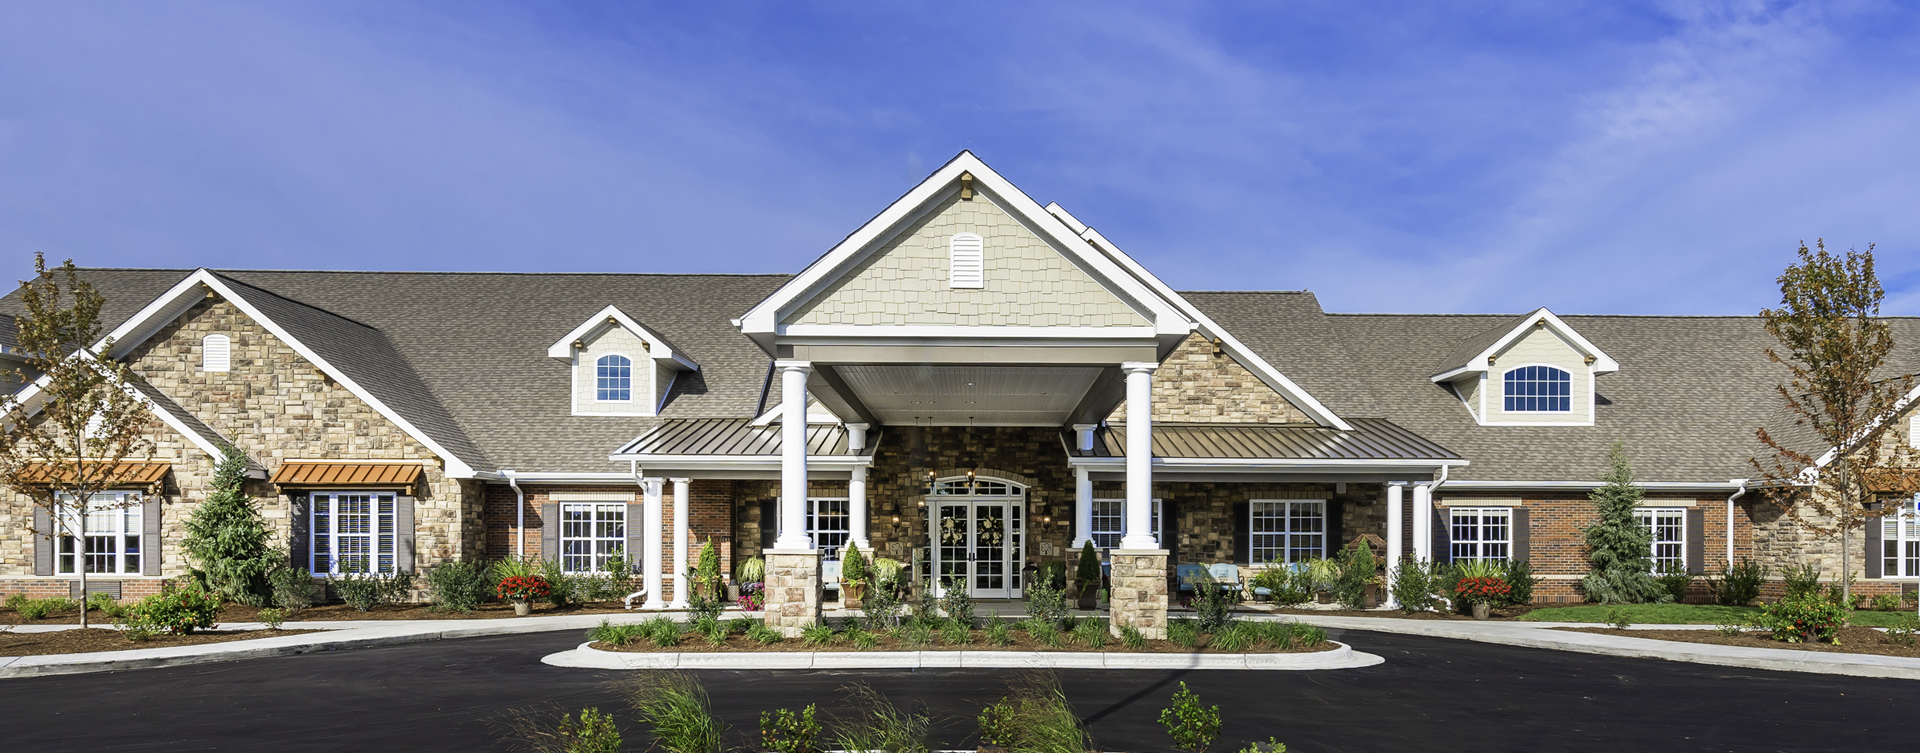 Stop by and visit us at  Bickford of Shelby Township